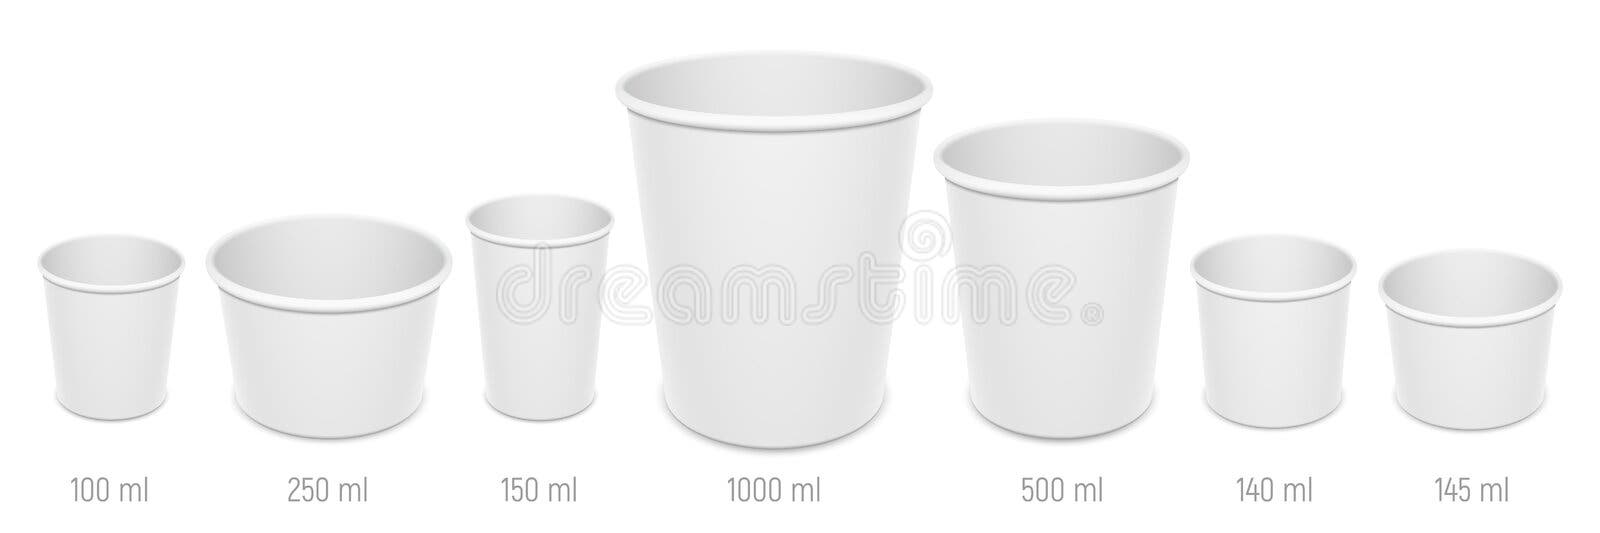 https://thumbs.dreamstime.com/b/set-vector-realistic-blank-disposable-ice-cream-buckets-cups-bowls-different-sizes-paper-open-empty-food-containers-mockup-223071878.jpg?w=1600